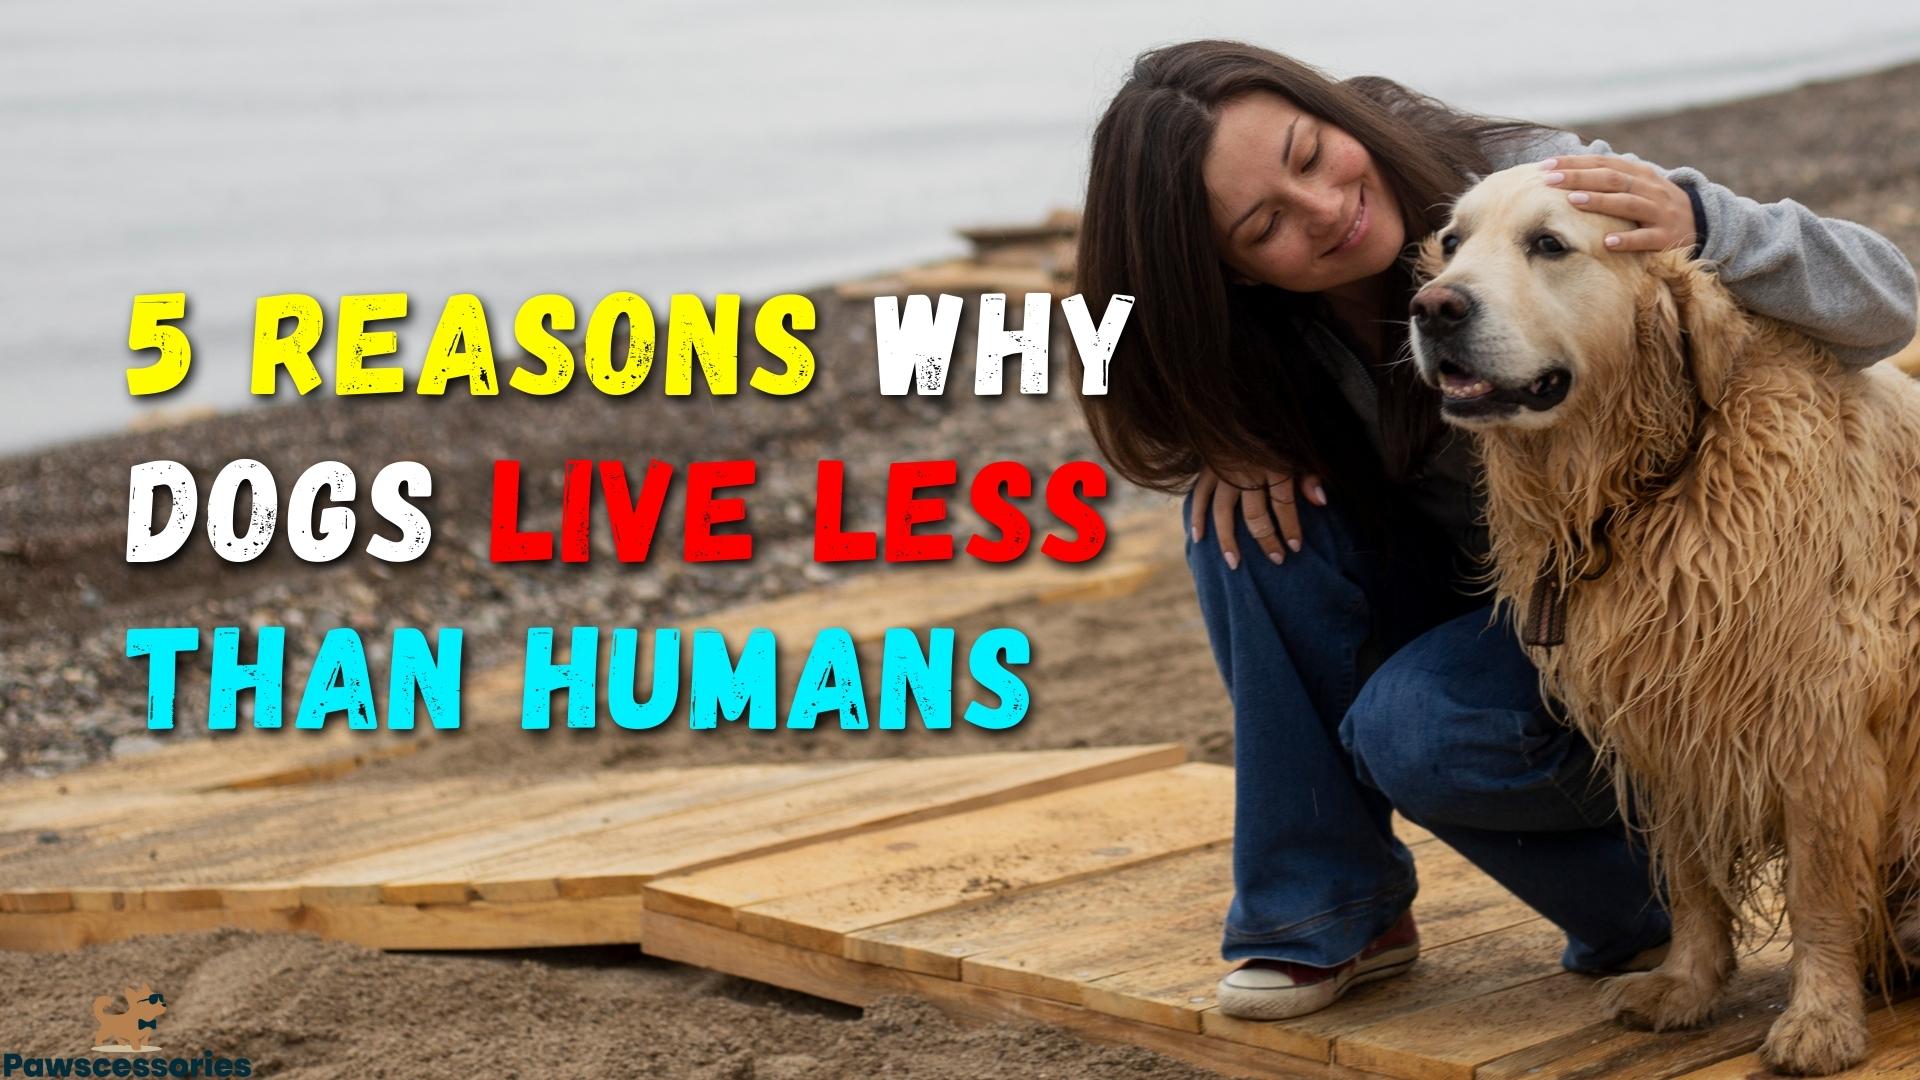 The 5 Reasons Why Dogs Live Less Than Humans